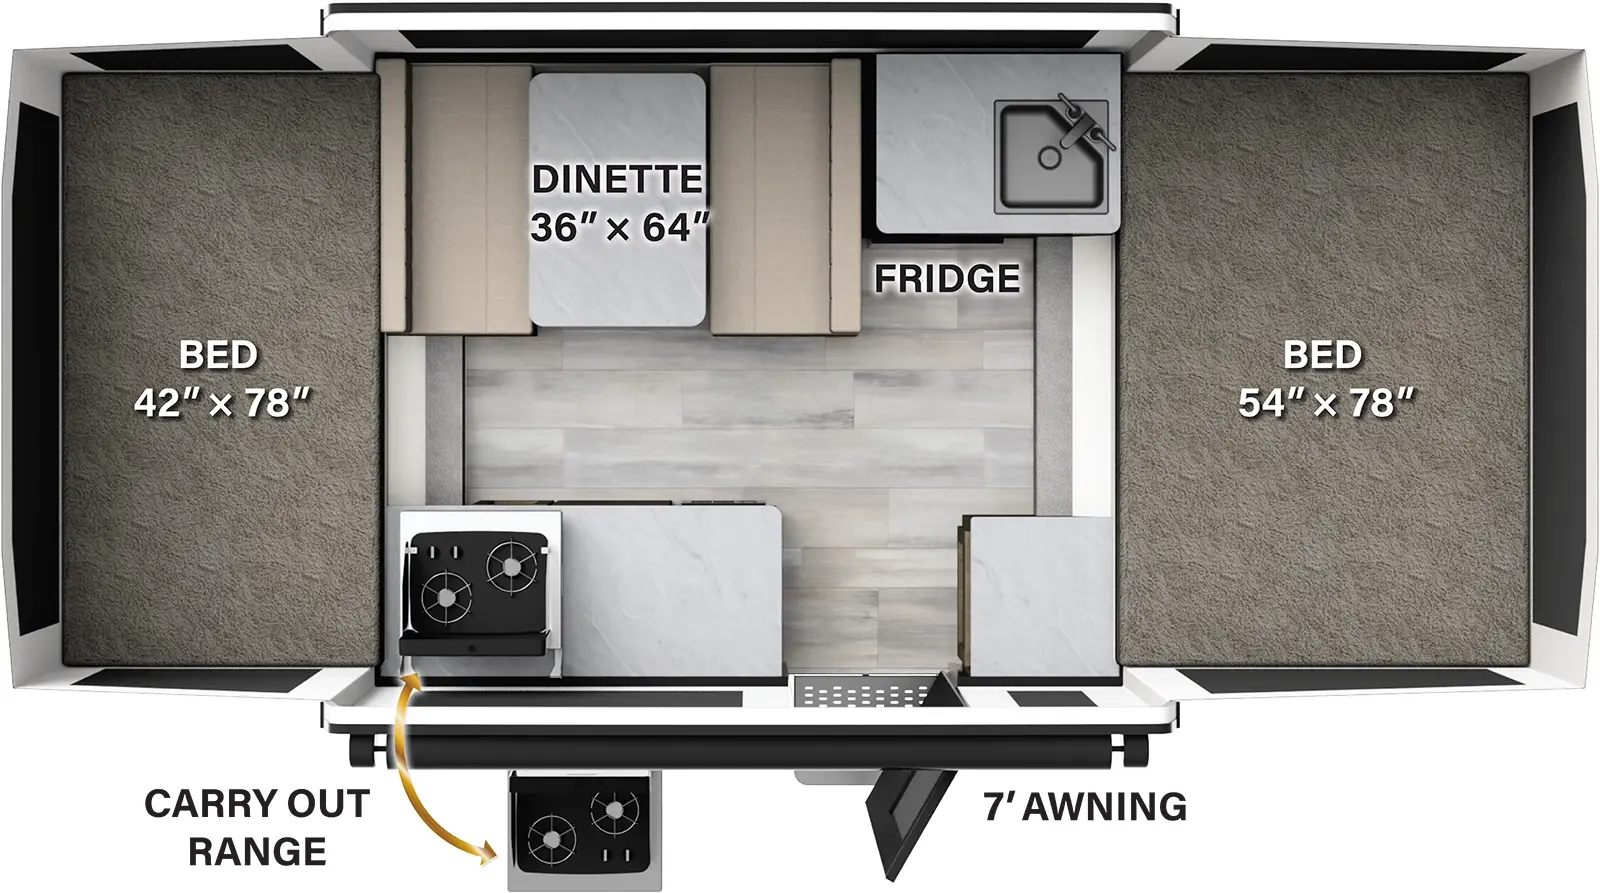 The 176LTD has no slideouts and one entry door. Exterior features a 7 foot awning and a carry out range. Interior layout front to back: tent bed; kitchen area with sink, refrigerator, dinette, two cabinets, and a carry out range; rear tent bed.